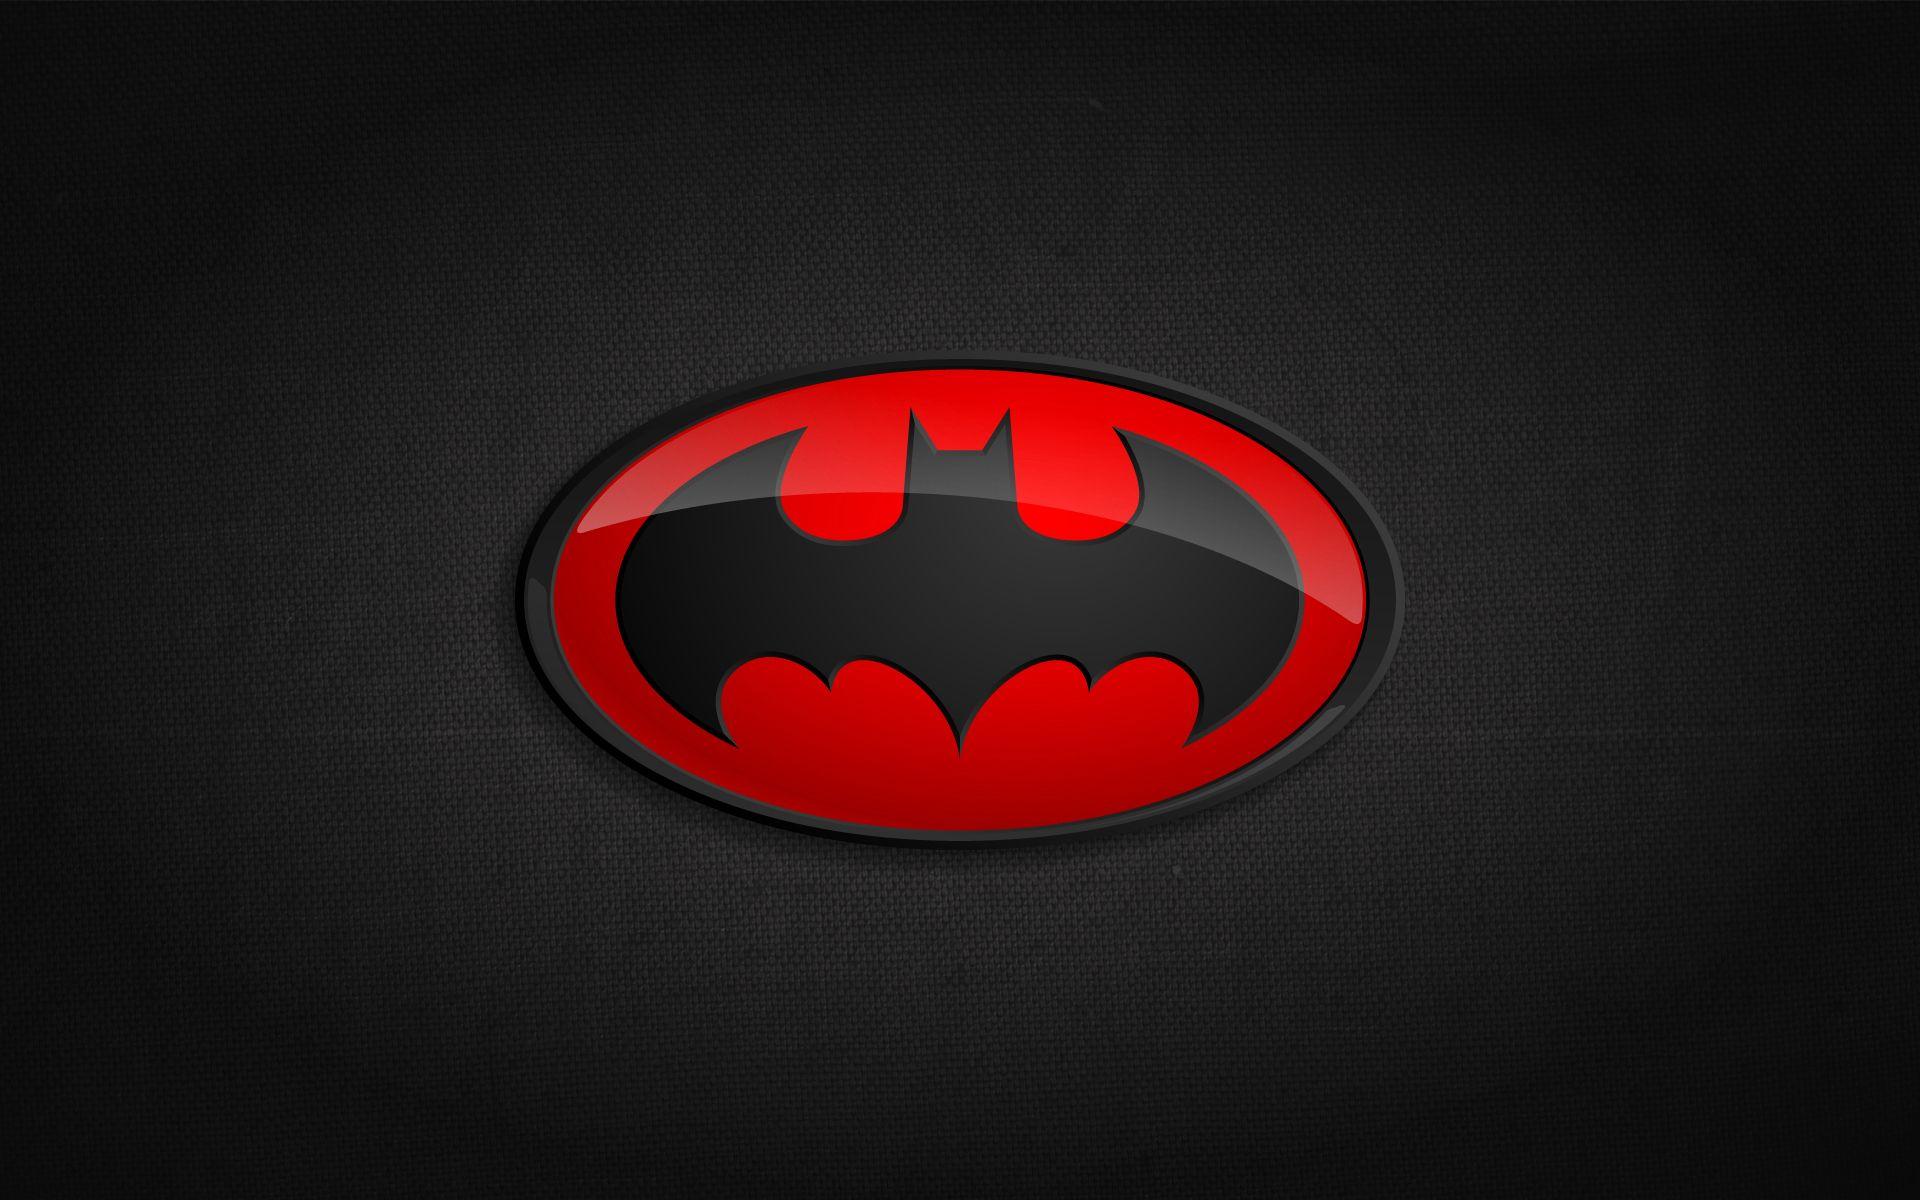 Black and Red Batman Logo - Android Wallpapers Collected From the 'Net III: Favorites for Red ...